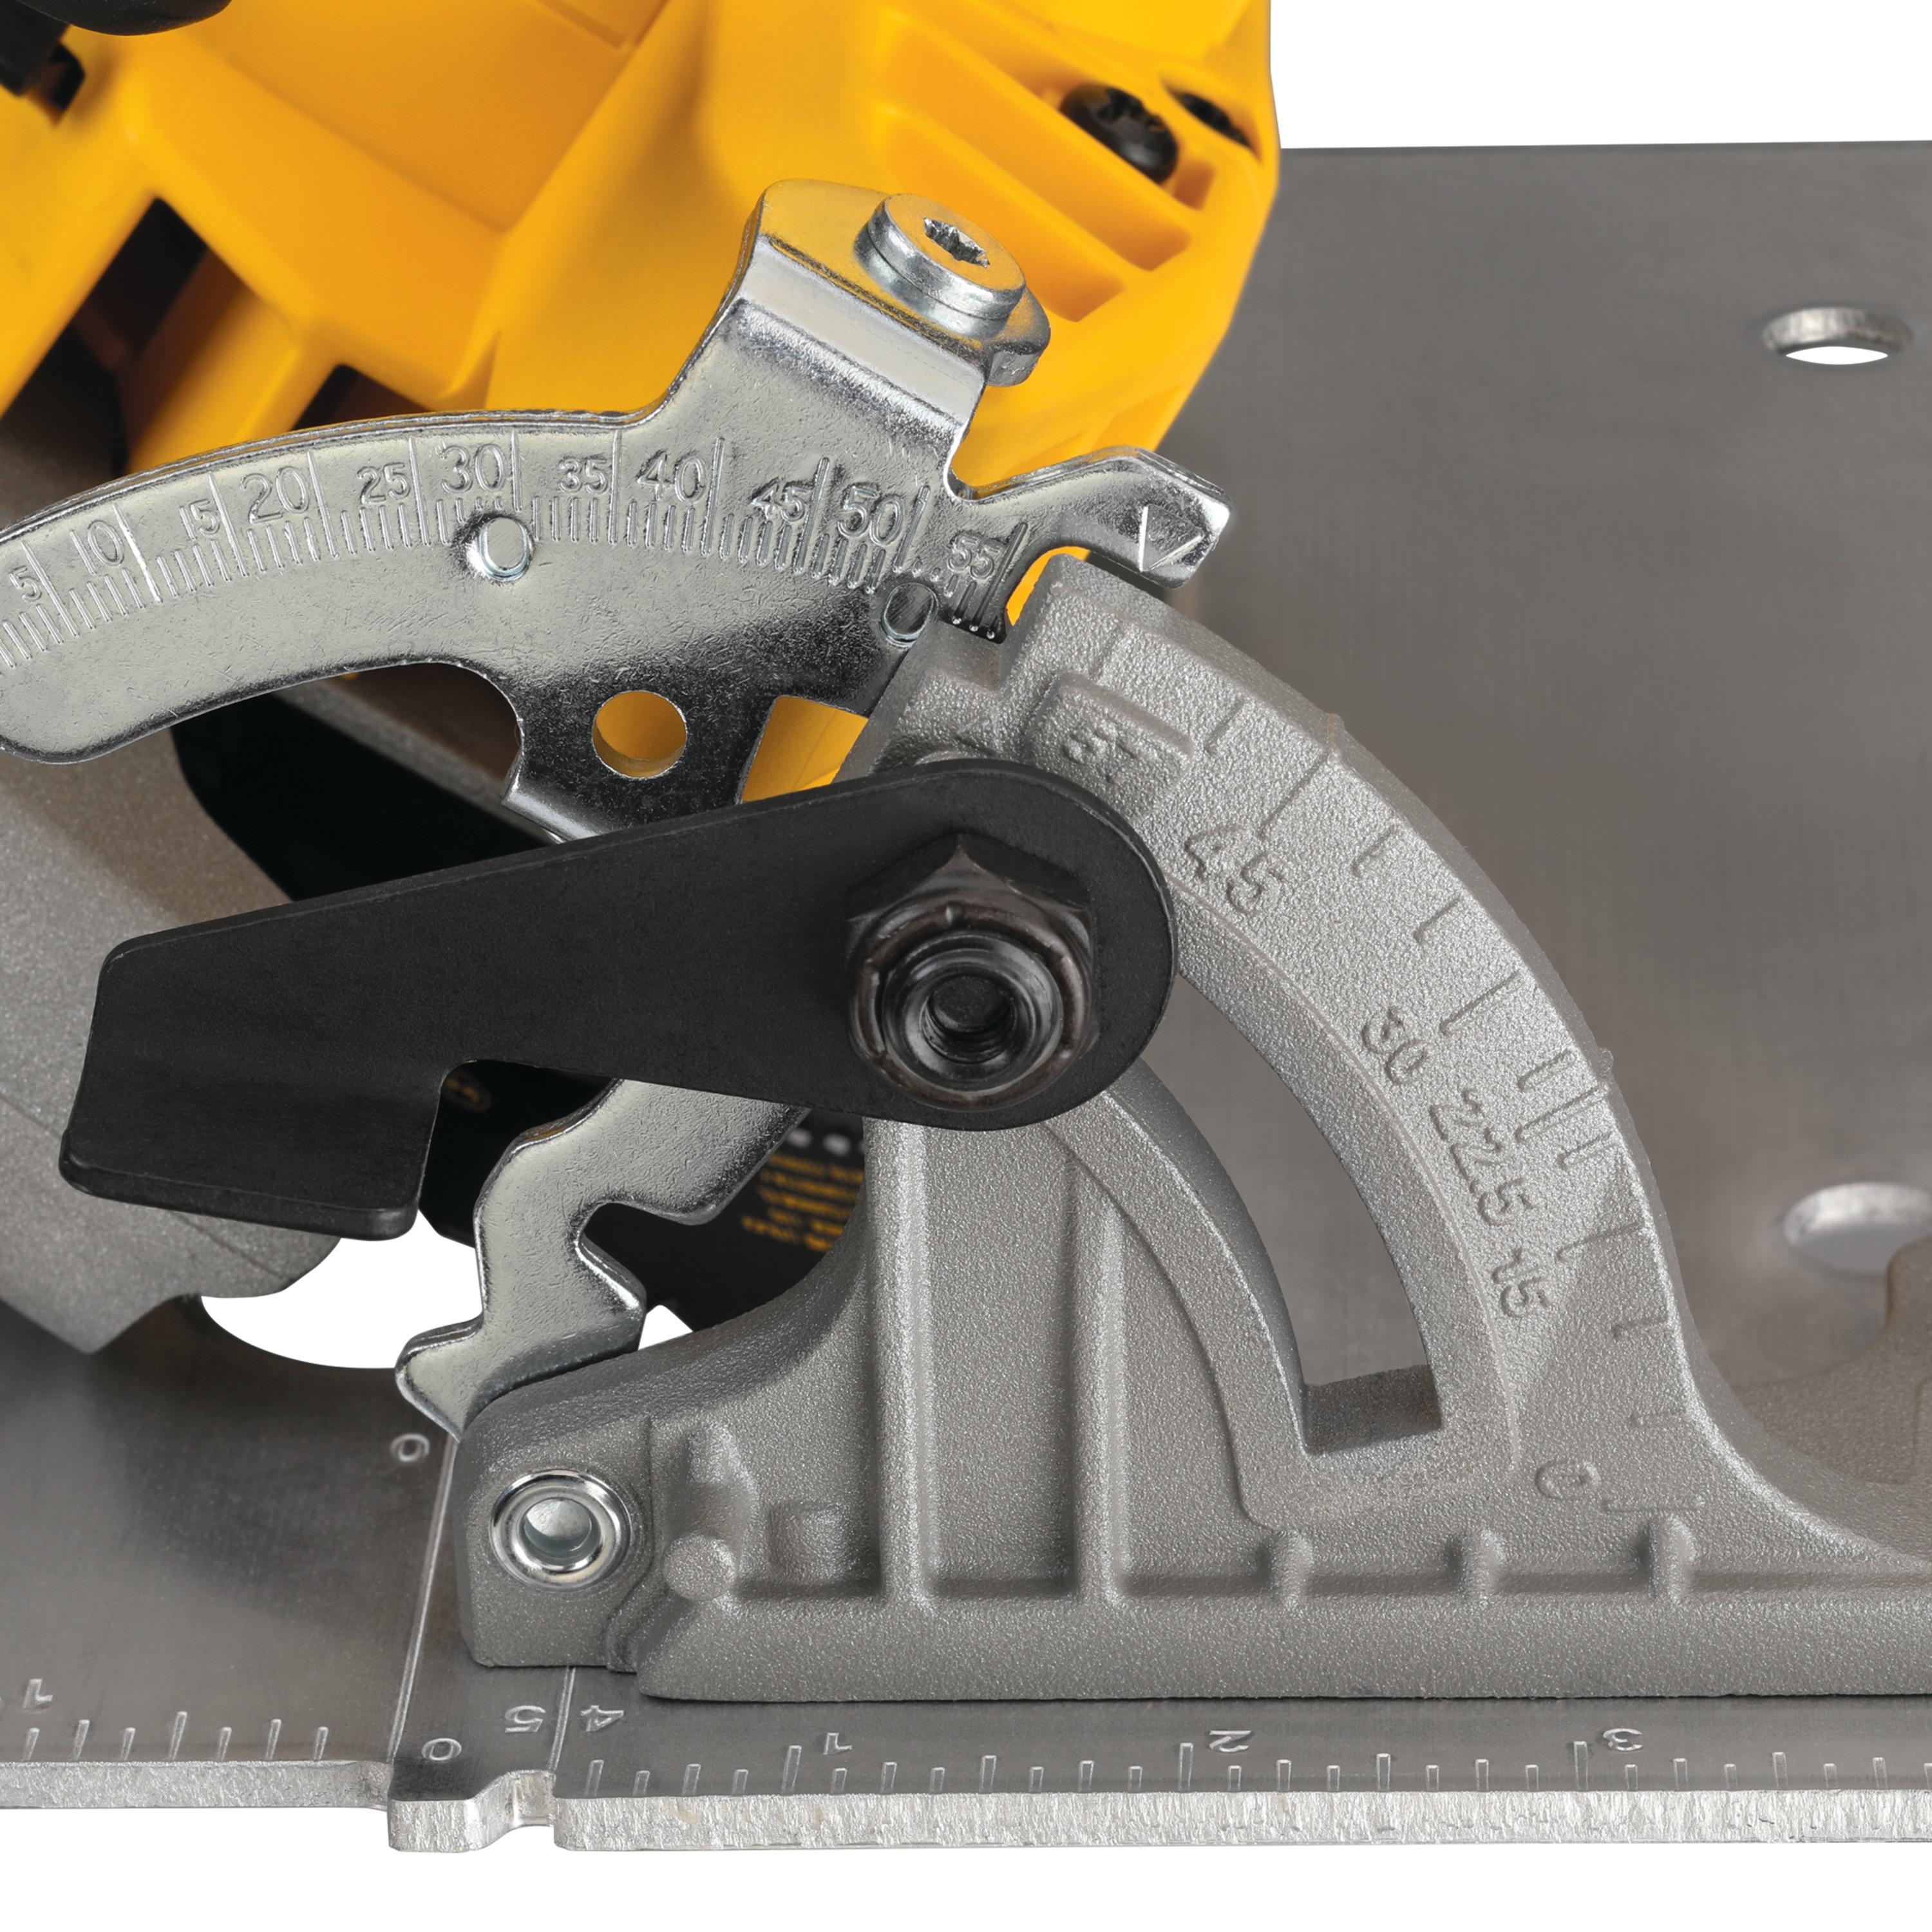 Level adjustment feature of XR brushless circular saw with POWER DETECT tool technology.